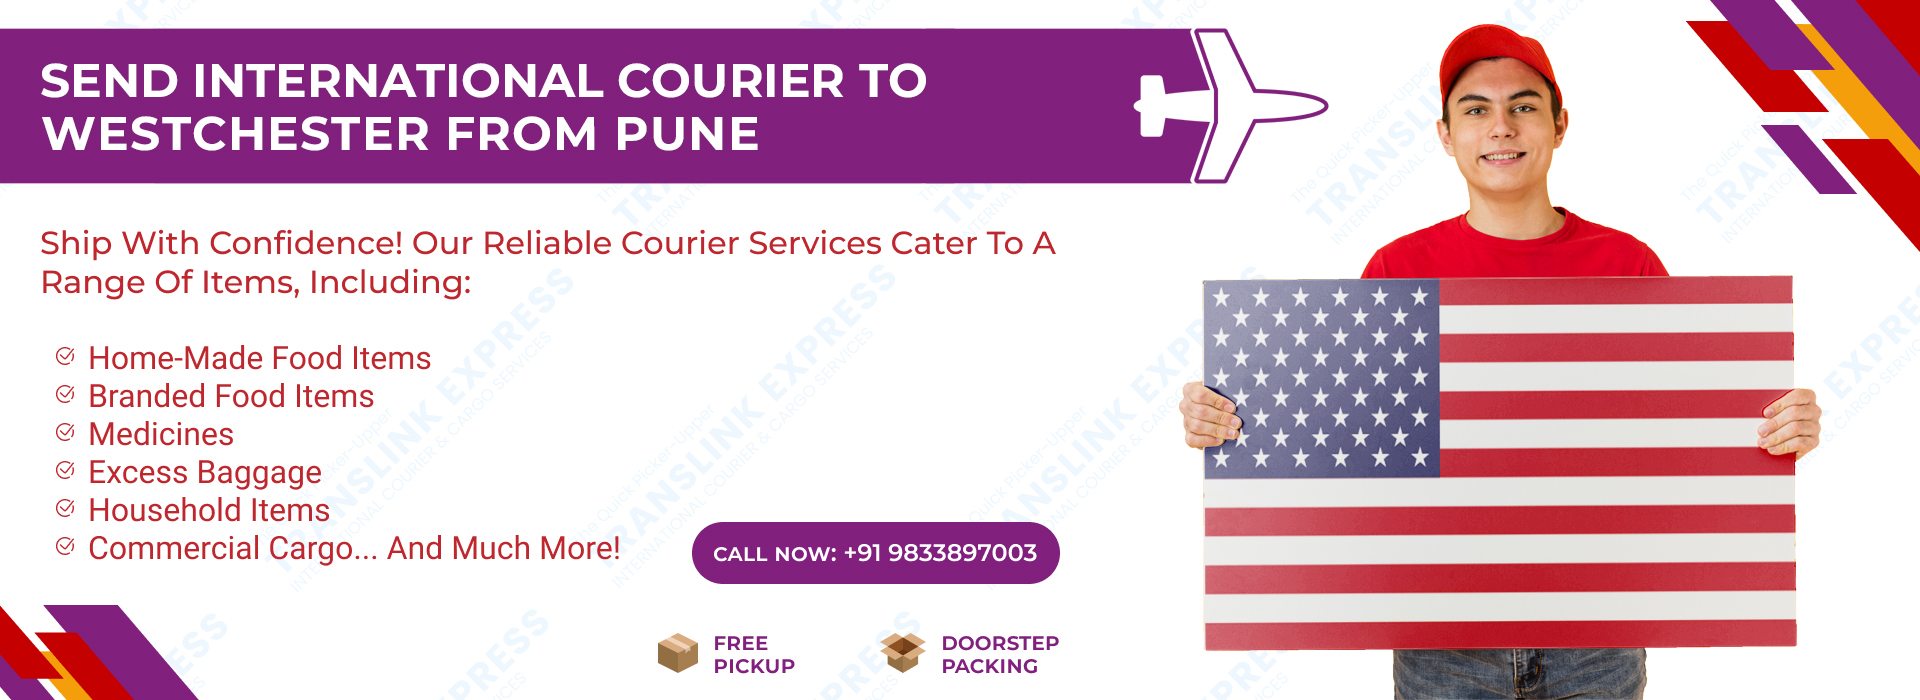 Courier to Westchester From Pune